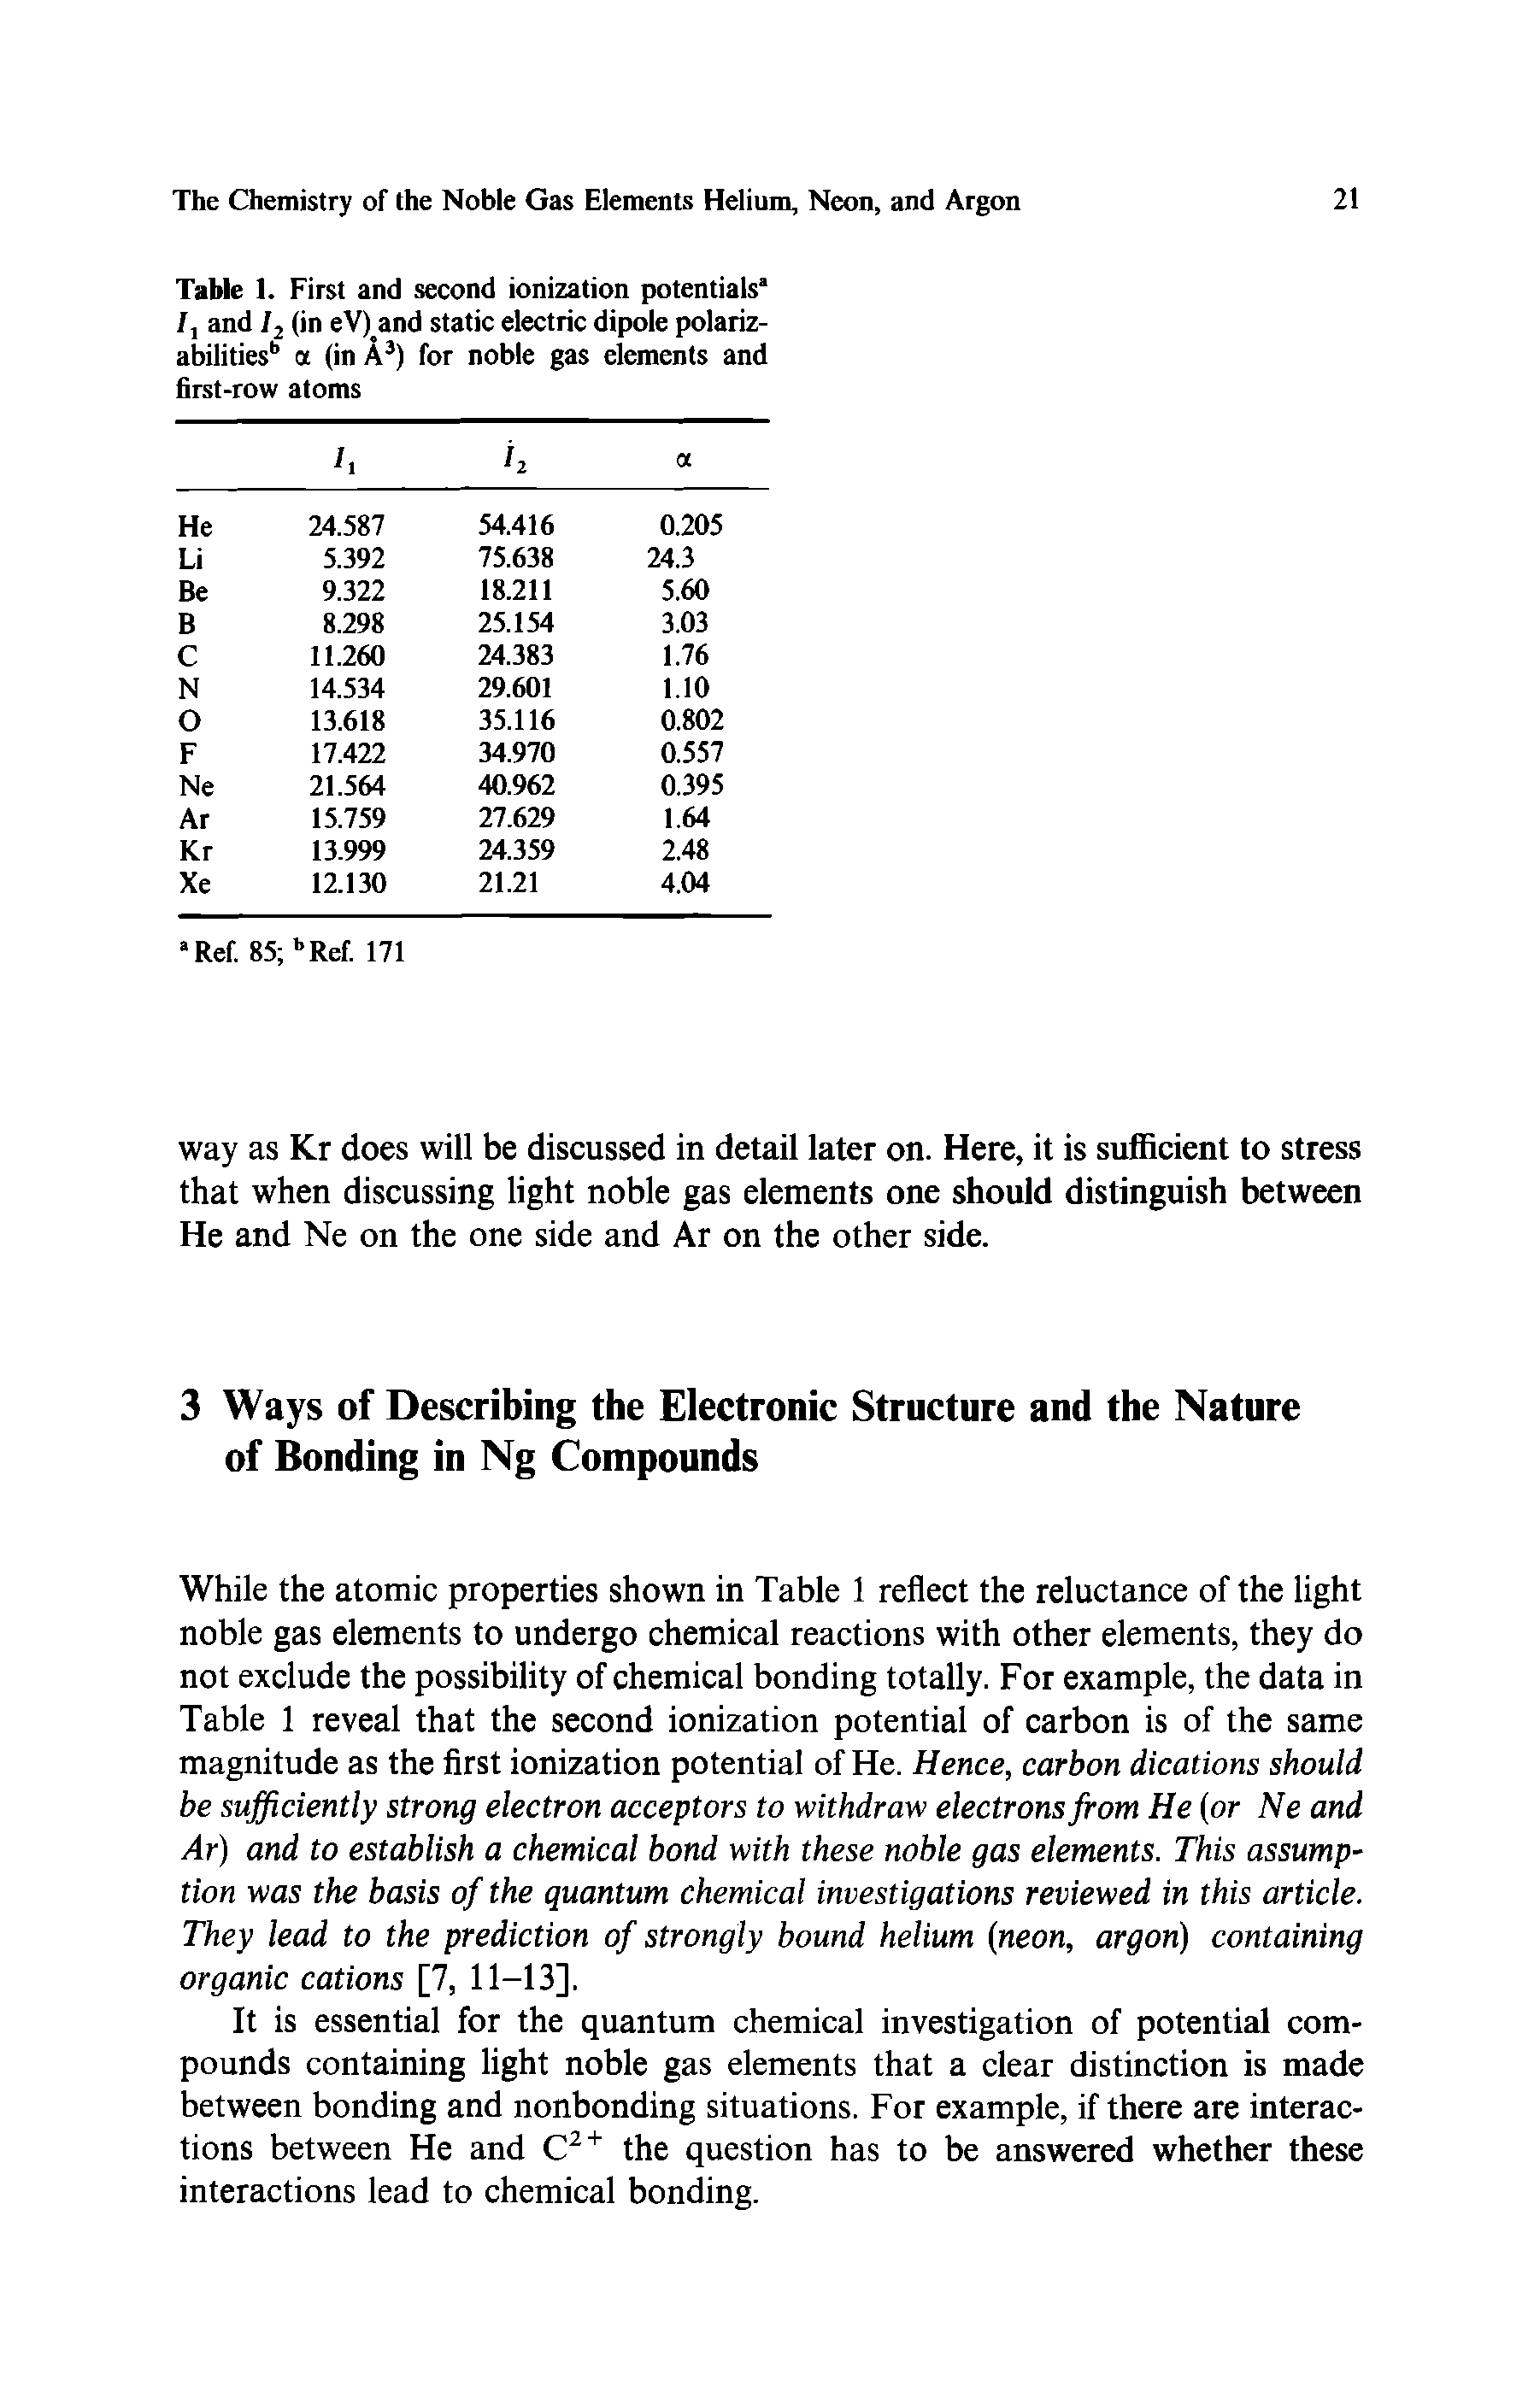 Table 1. First and second ionization potentials /, and /j (in eV) and static electric dipole polarizabilities a (in A ) for noble gas elements and first-row atoms...